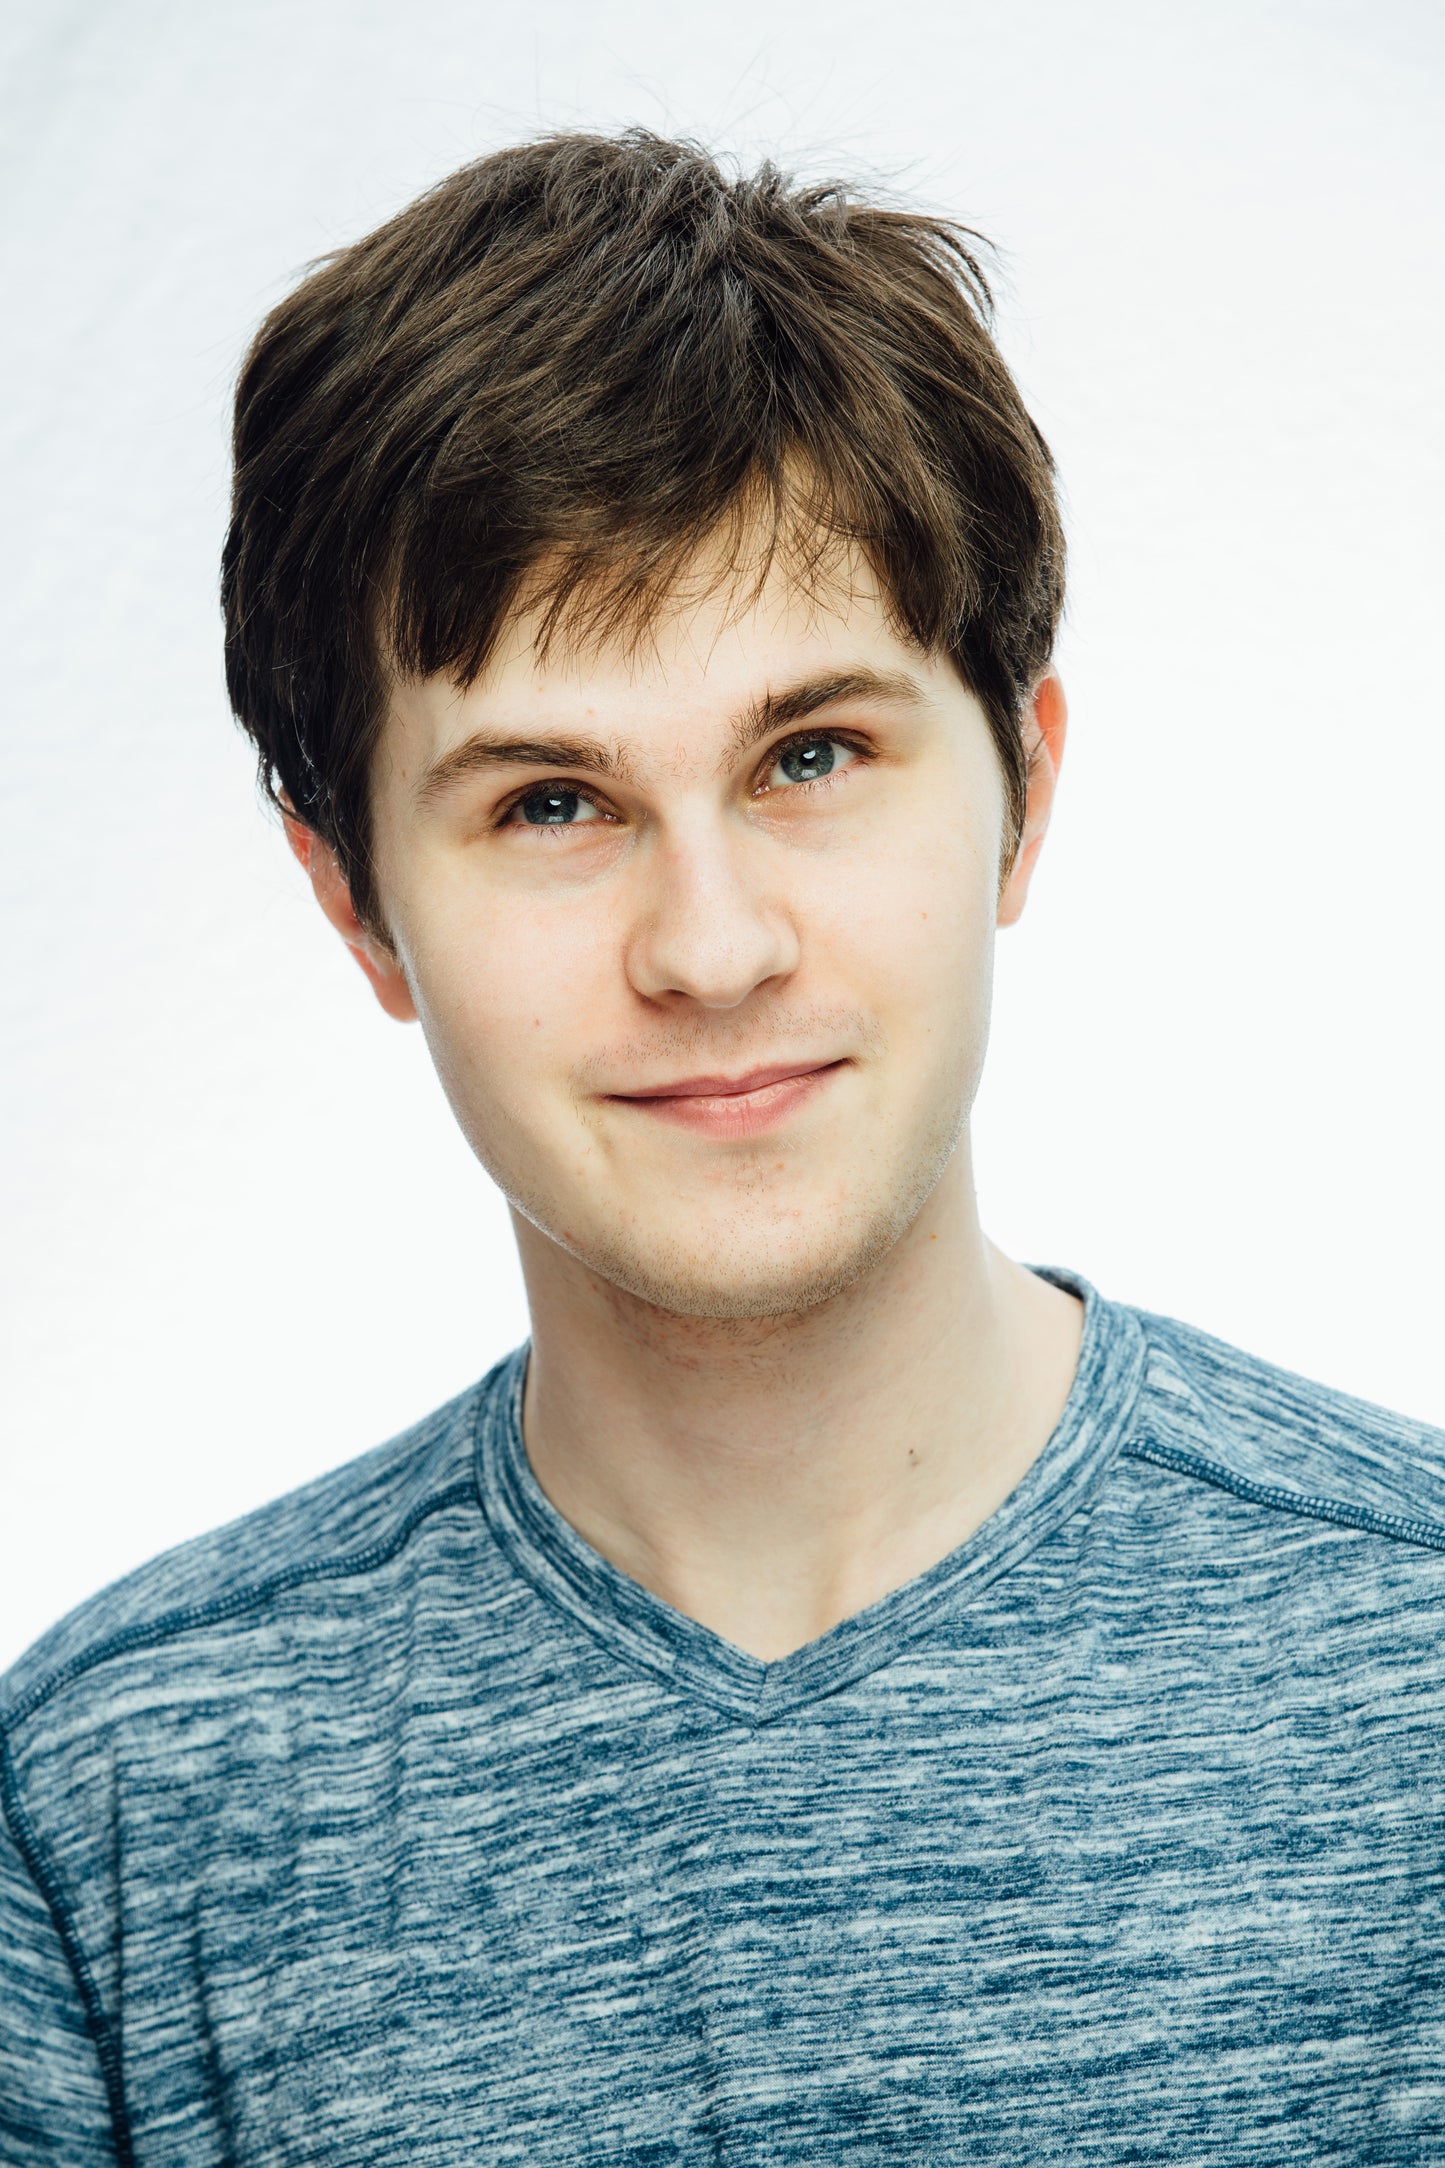 Smiling young man with brown hair and light blue tshirt